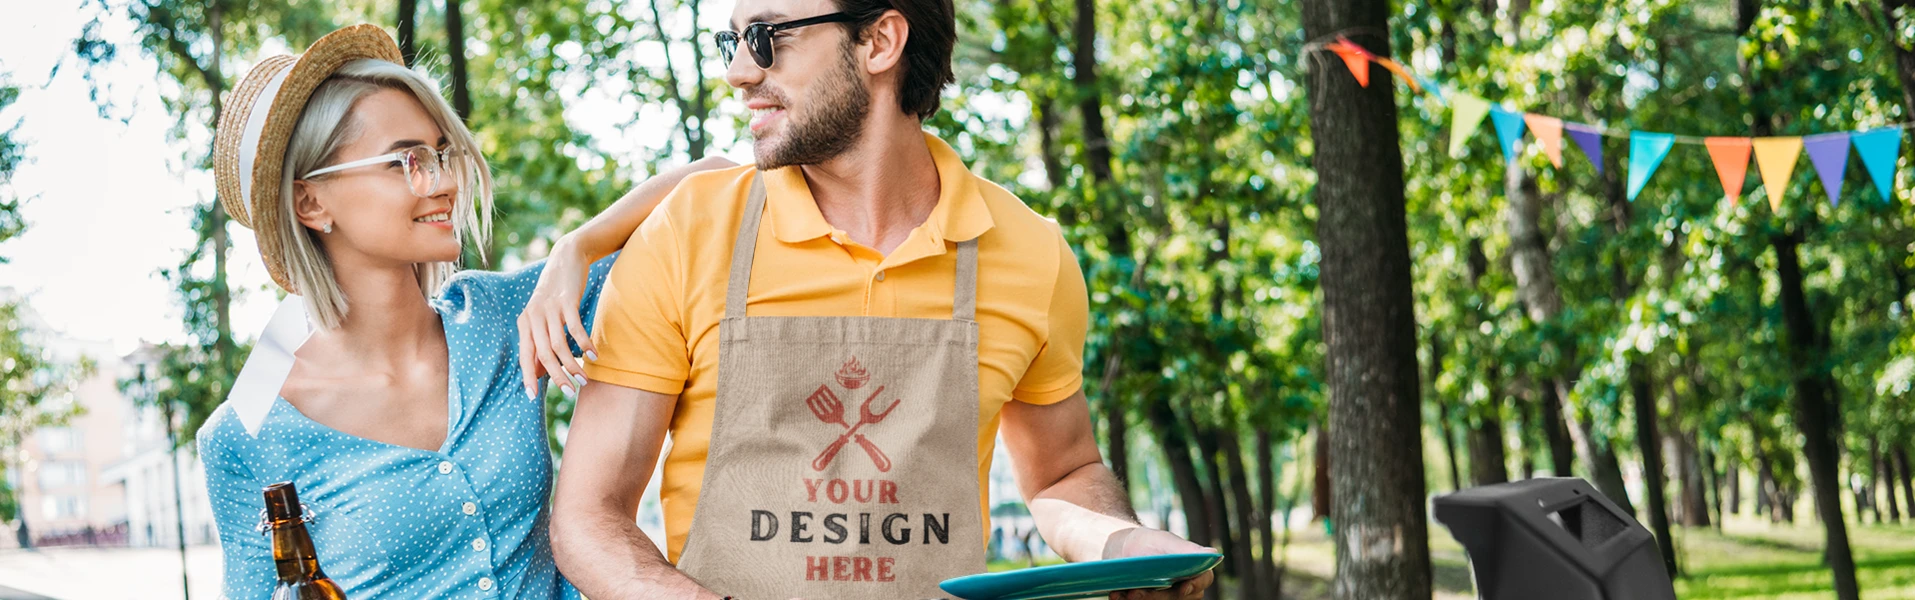  A man wears a personalized apron and barbecues.